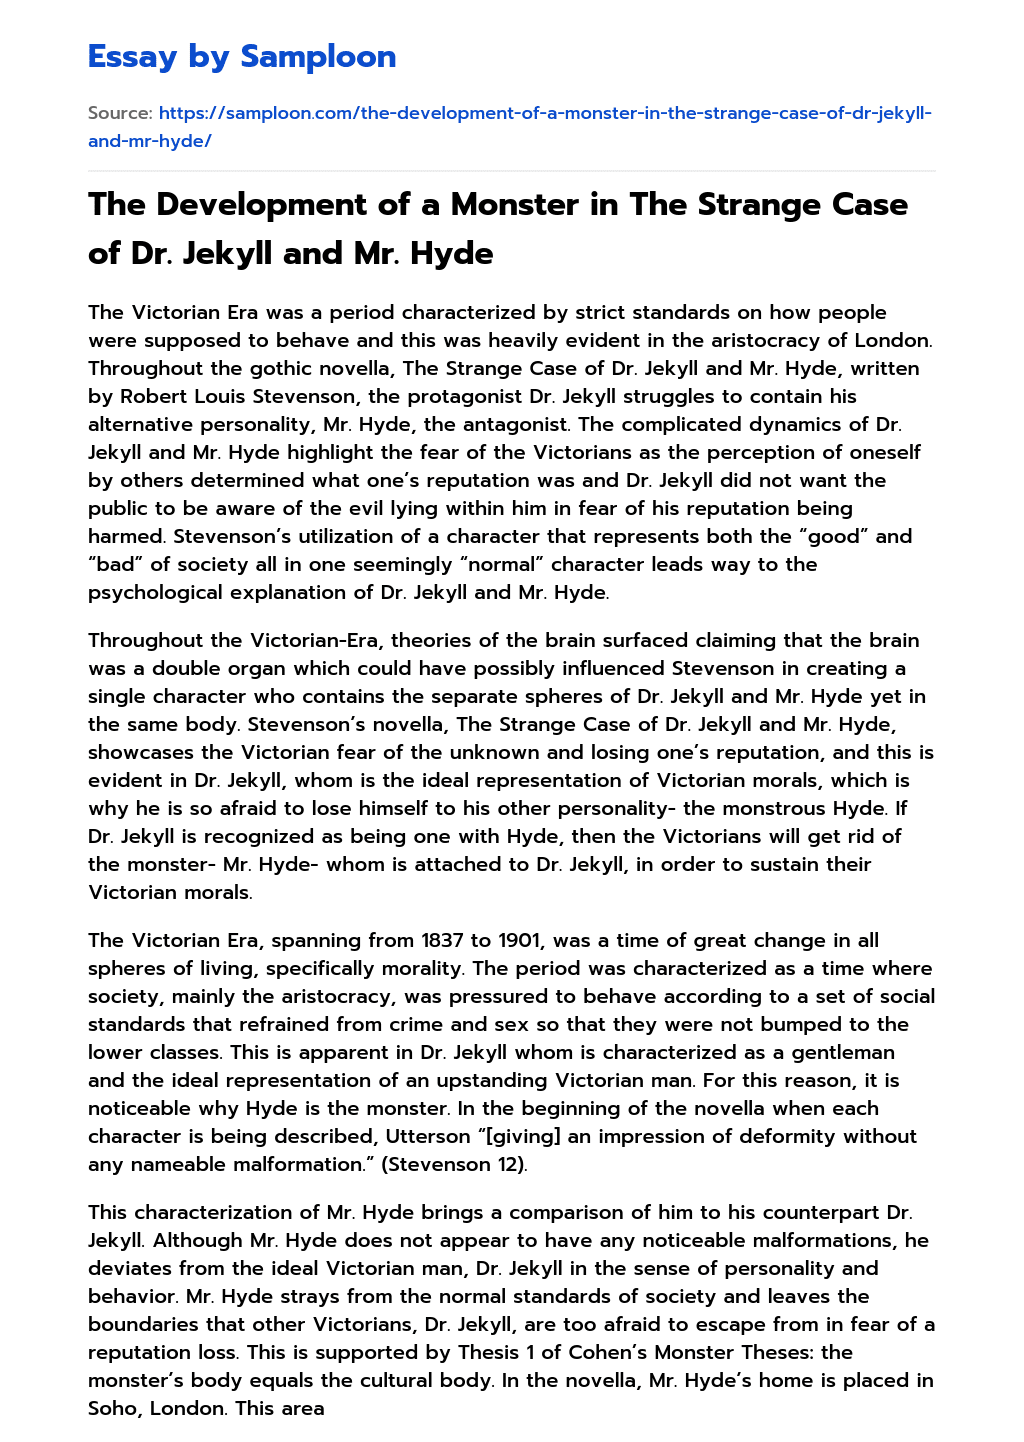 The Development of a Monster in The Strange Case of Dr. Jekyll and Mr. Hyde Analytical Essay essay